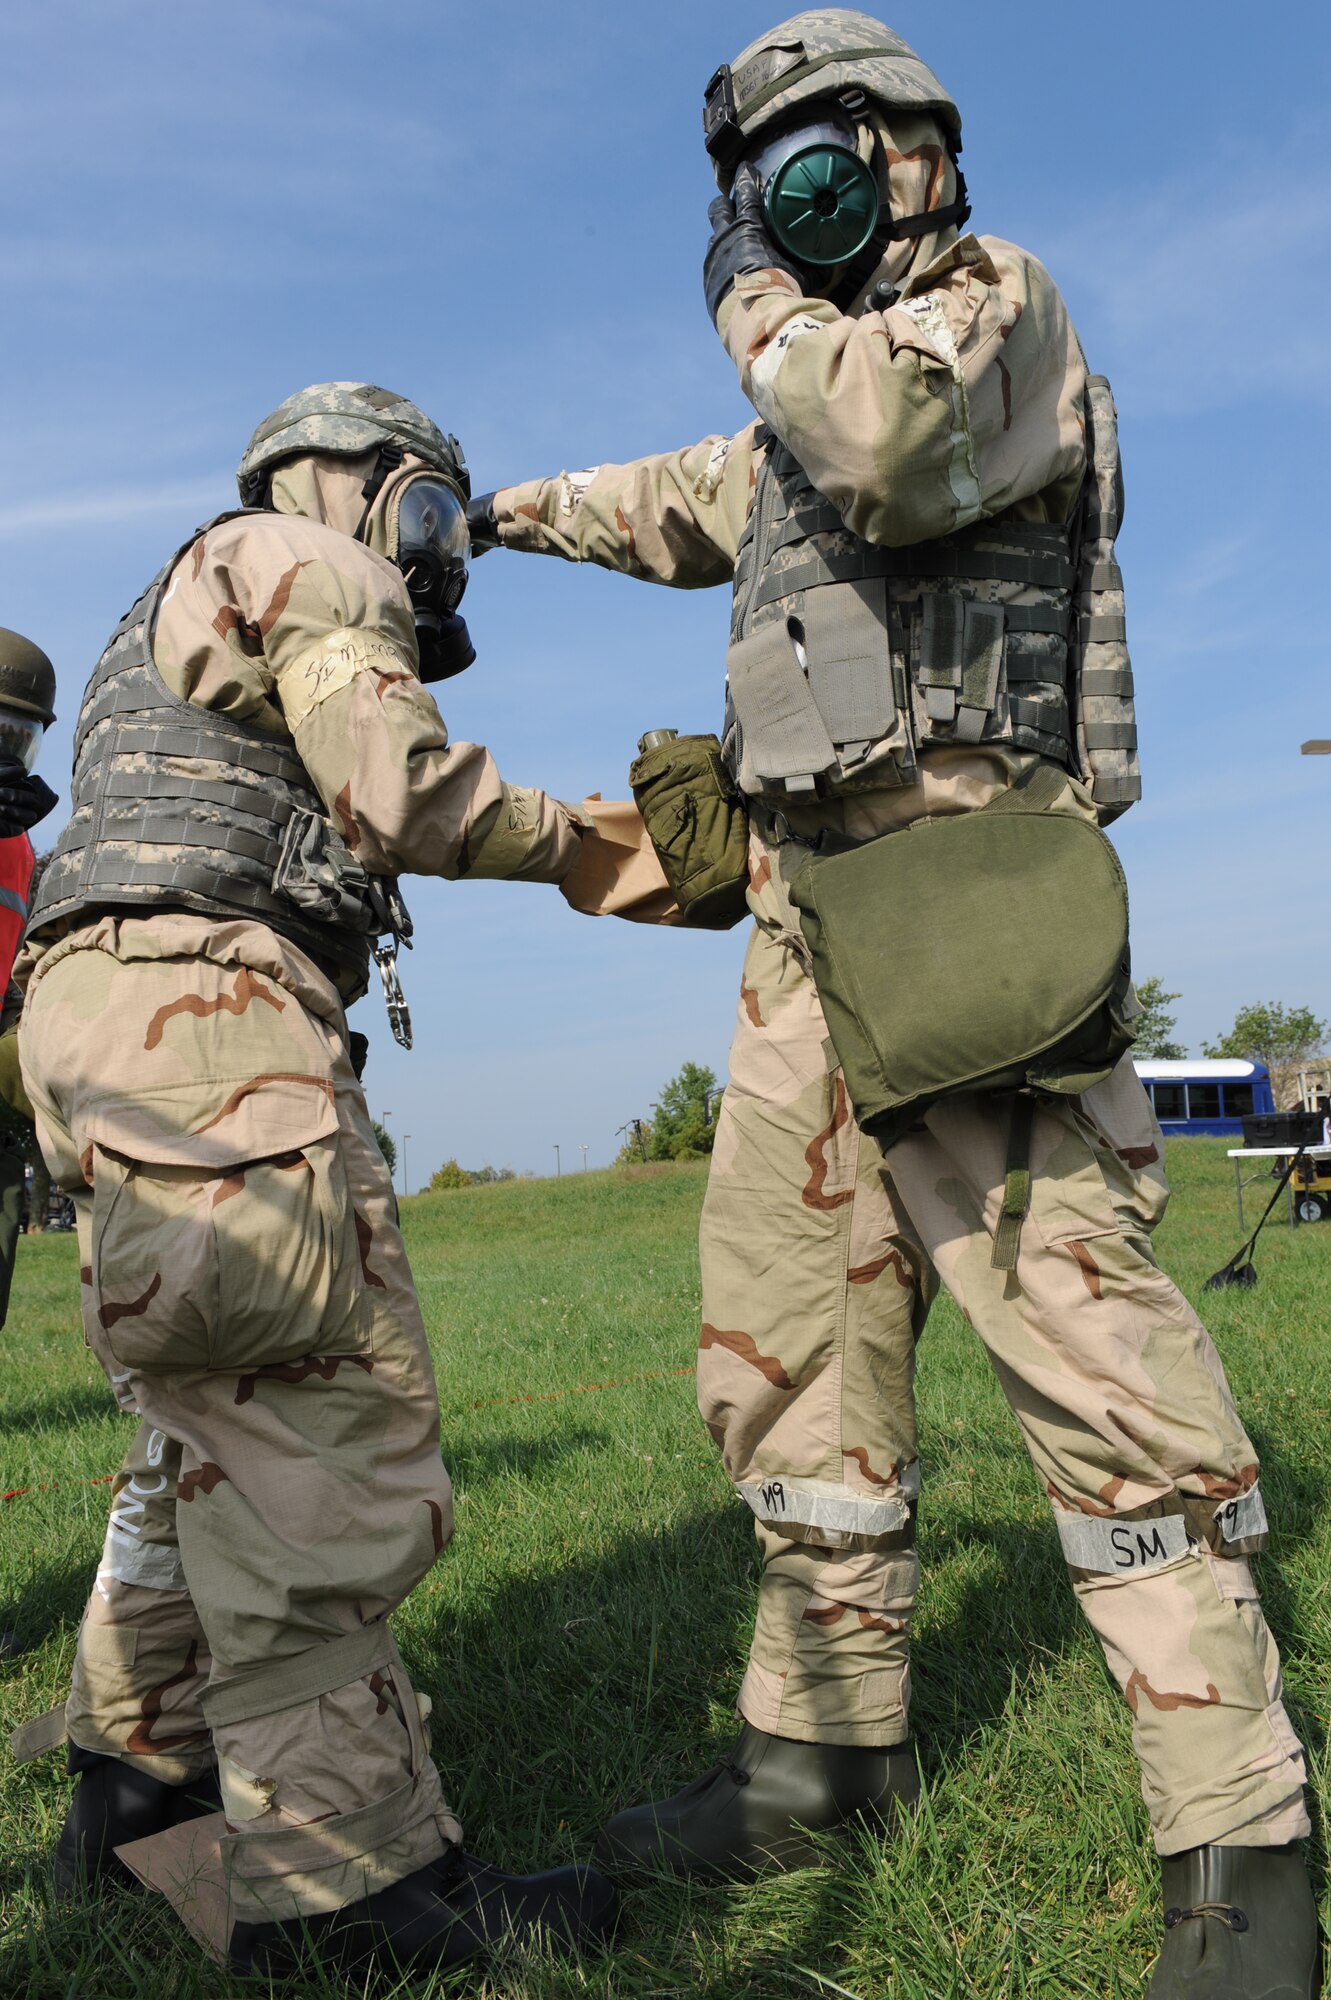 WHITEMAN AIR FORCE BASE, Mo. – Members of the 442nd Fighter Wing decontaminates each other while processing through a chemical line during an exercise, Sept. 16. The 442nd Fighter Wing has exercise to ensure their members remain current on their readiness training. (U.S. Air Force Photo/ SrA Cory Todd)